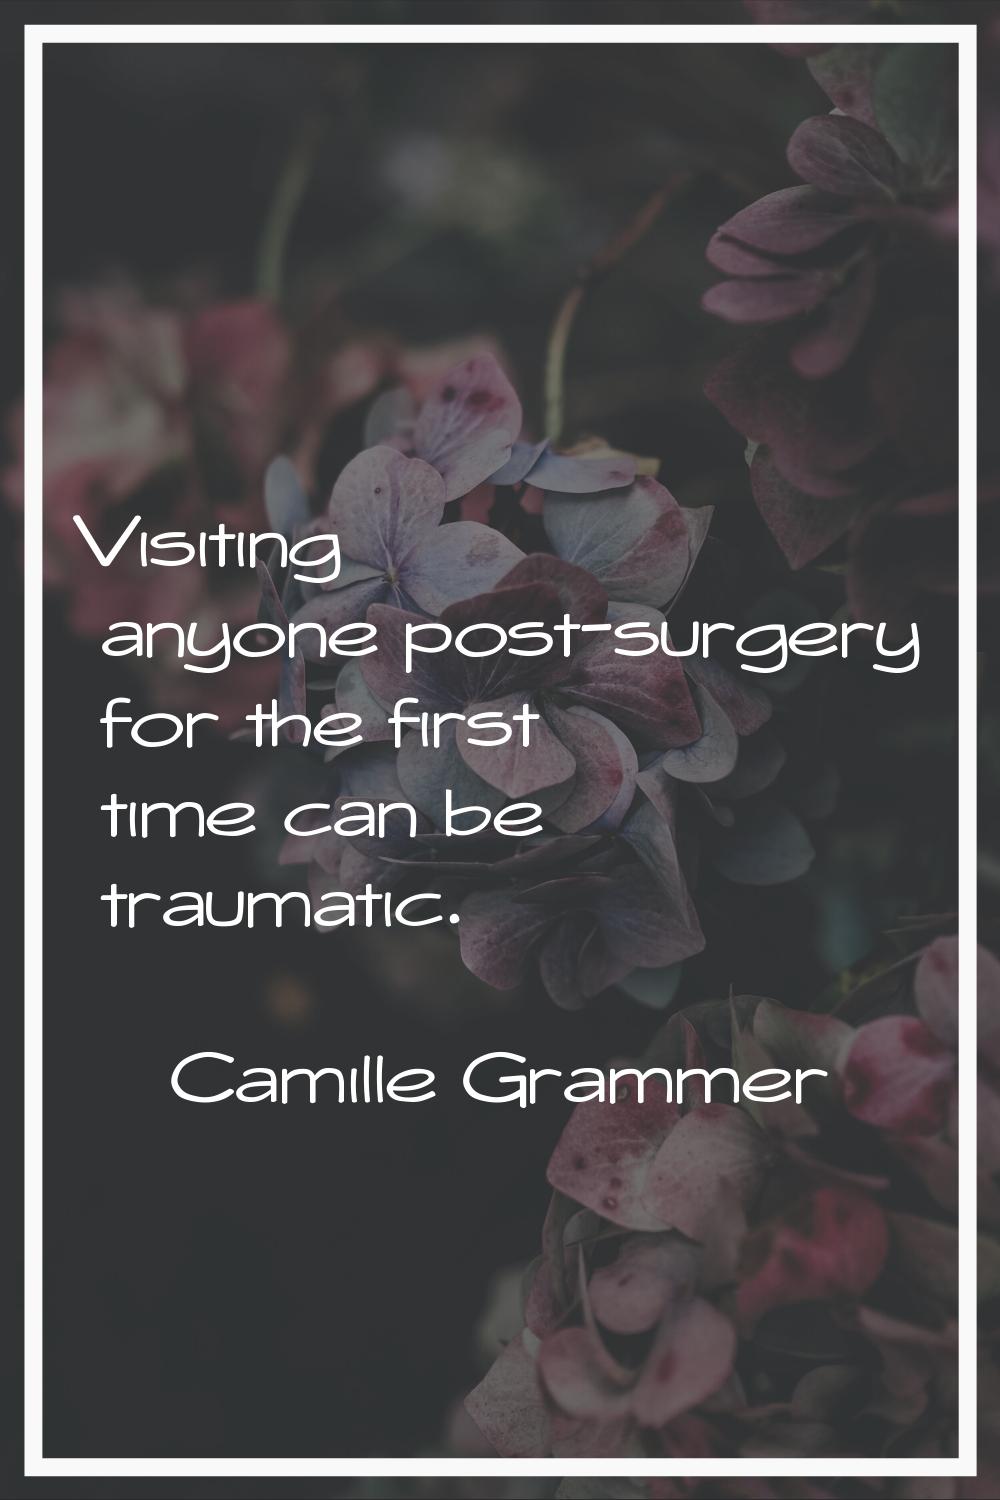 Visiting anyone post-surgery for the first time can be traumatic.